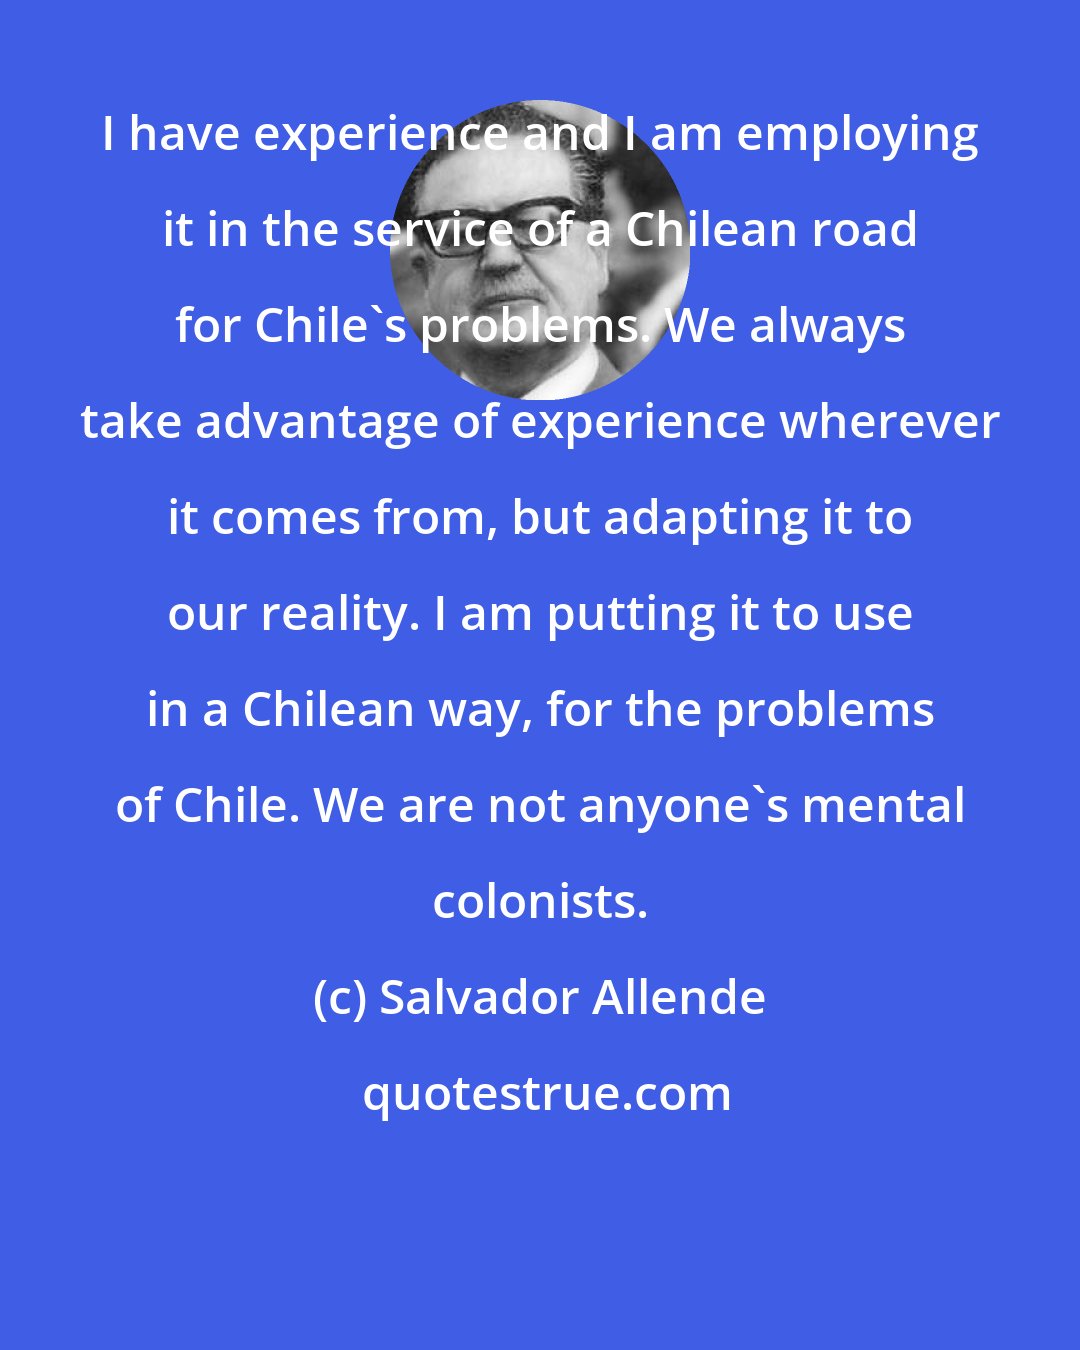 Salvador Allende: I have experience and I am employing it in the service of a Chilean road for Chile's problems. We always take advantage of experience wherever it comes from, but adapting it to our reality. I am putting it to use in a Chilean way, for the problems of Chile. We are not anyone's mental colonists.